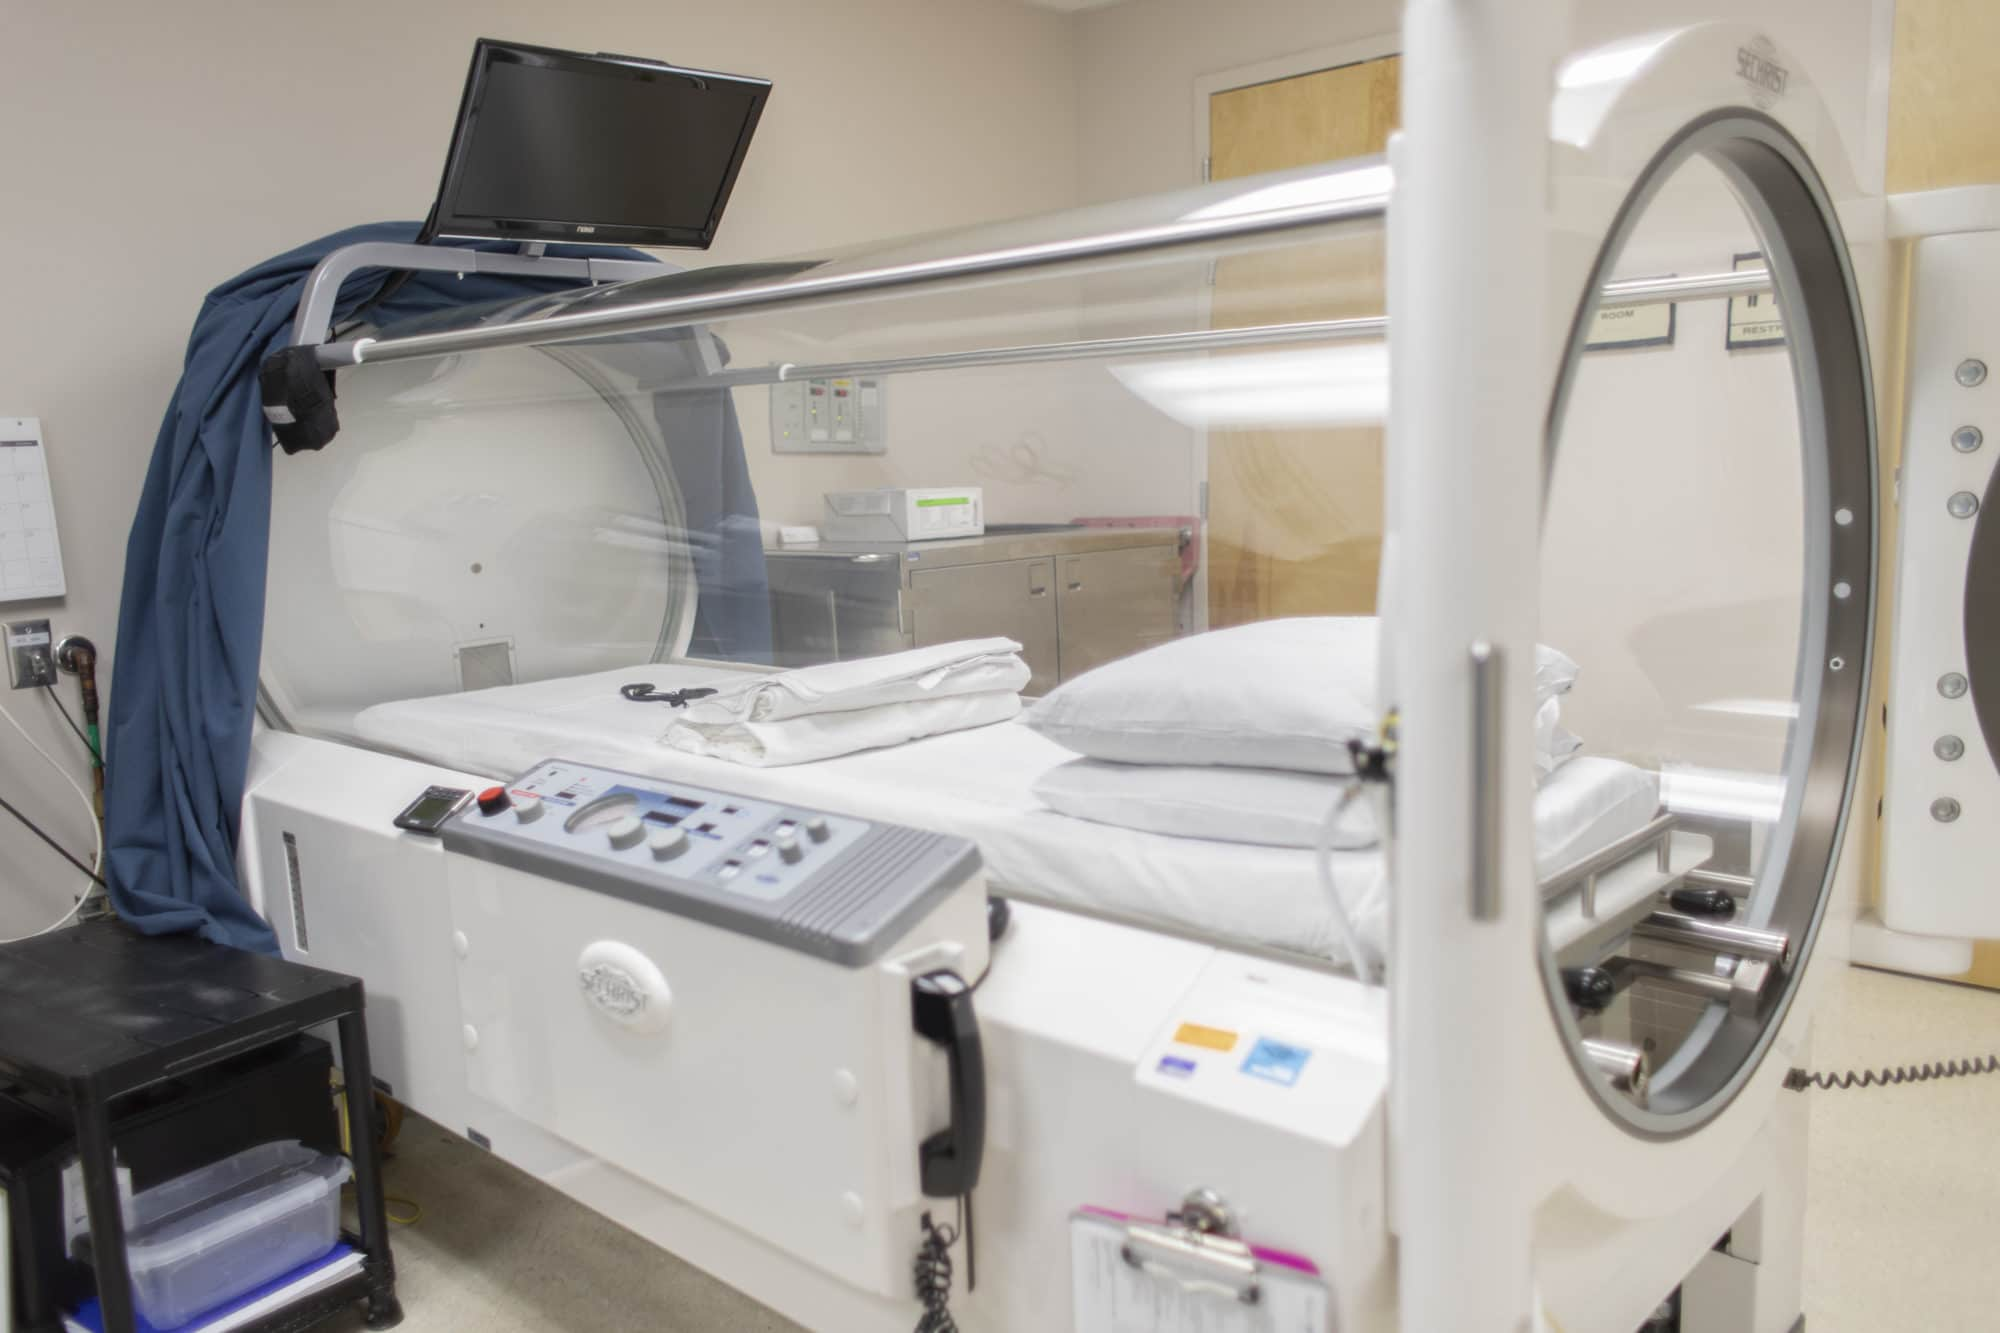 Hyperbaric o2 chamber: What are successful treatment procedures?